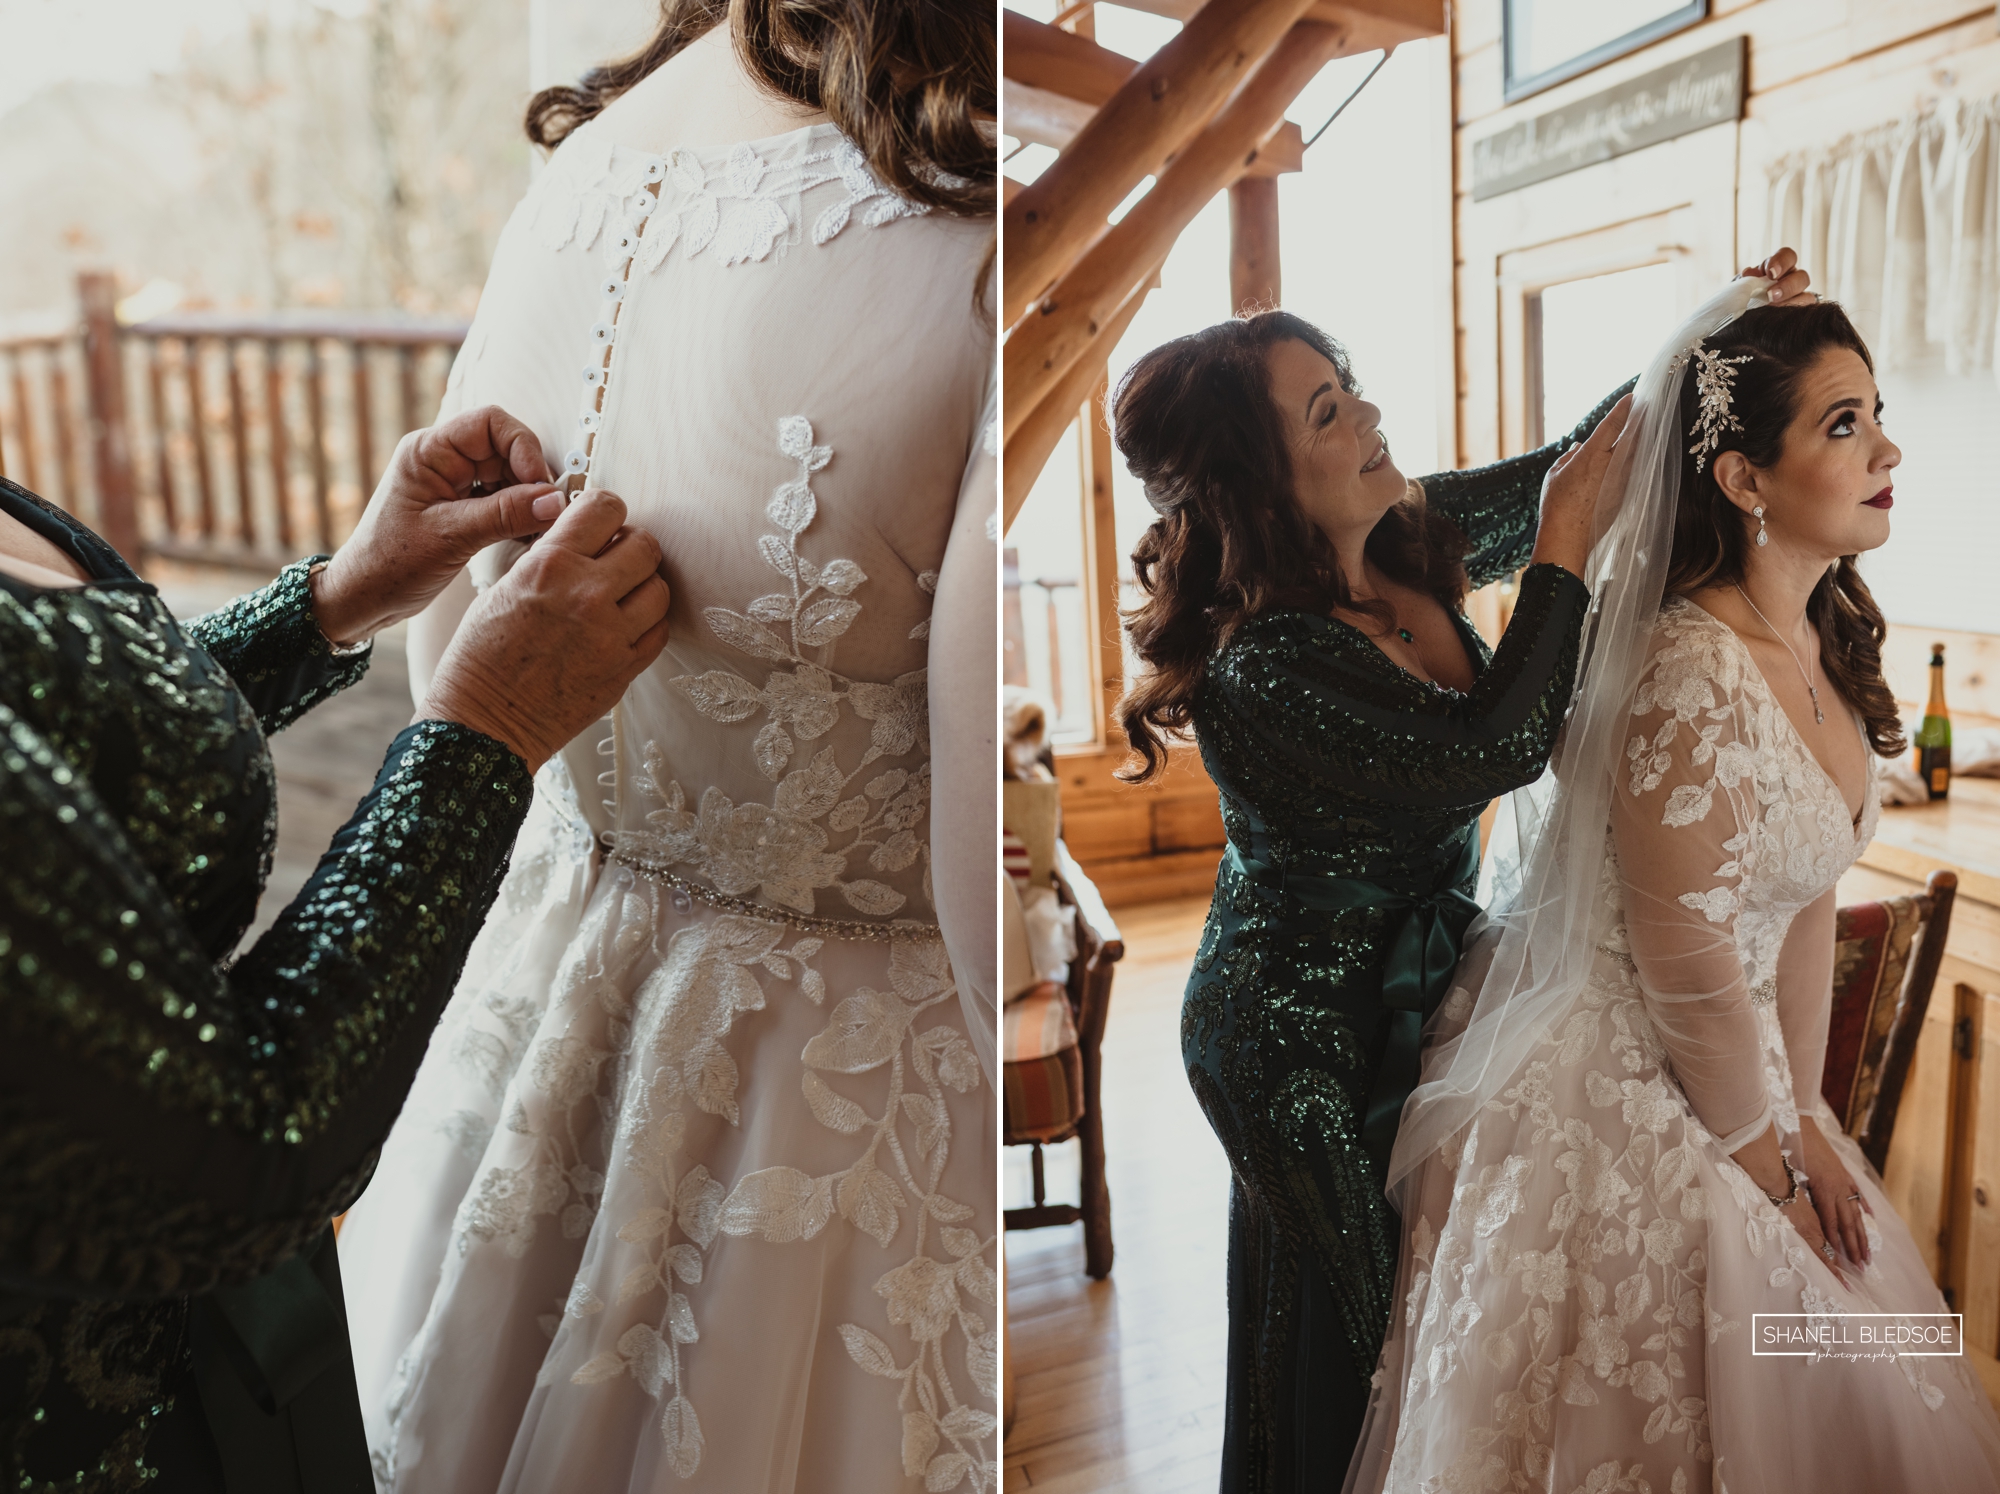 mother helping bride with dress